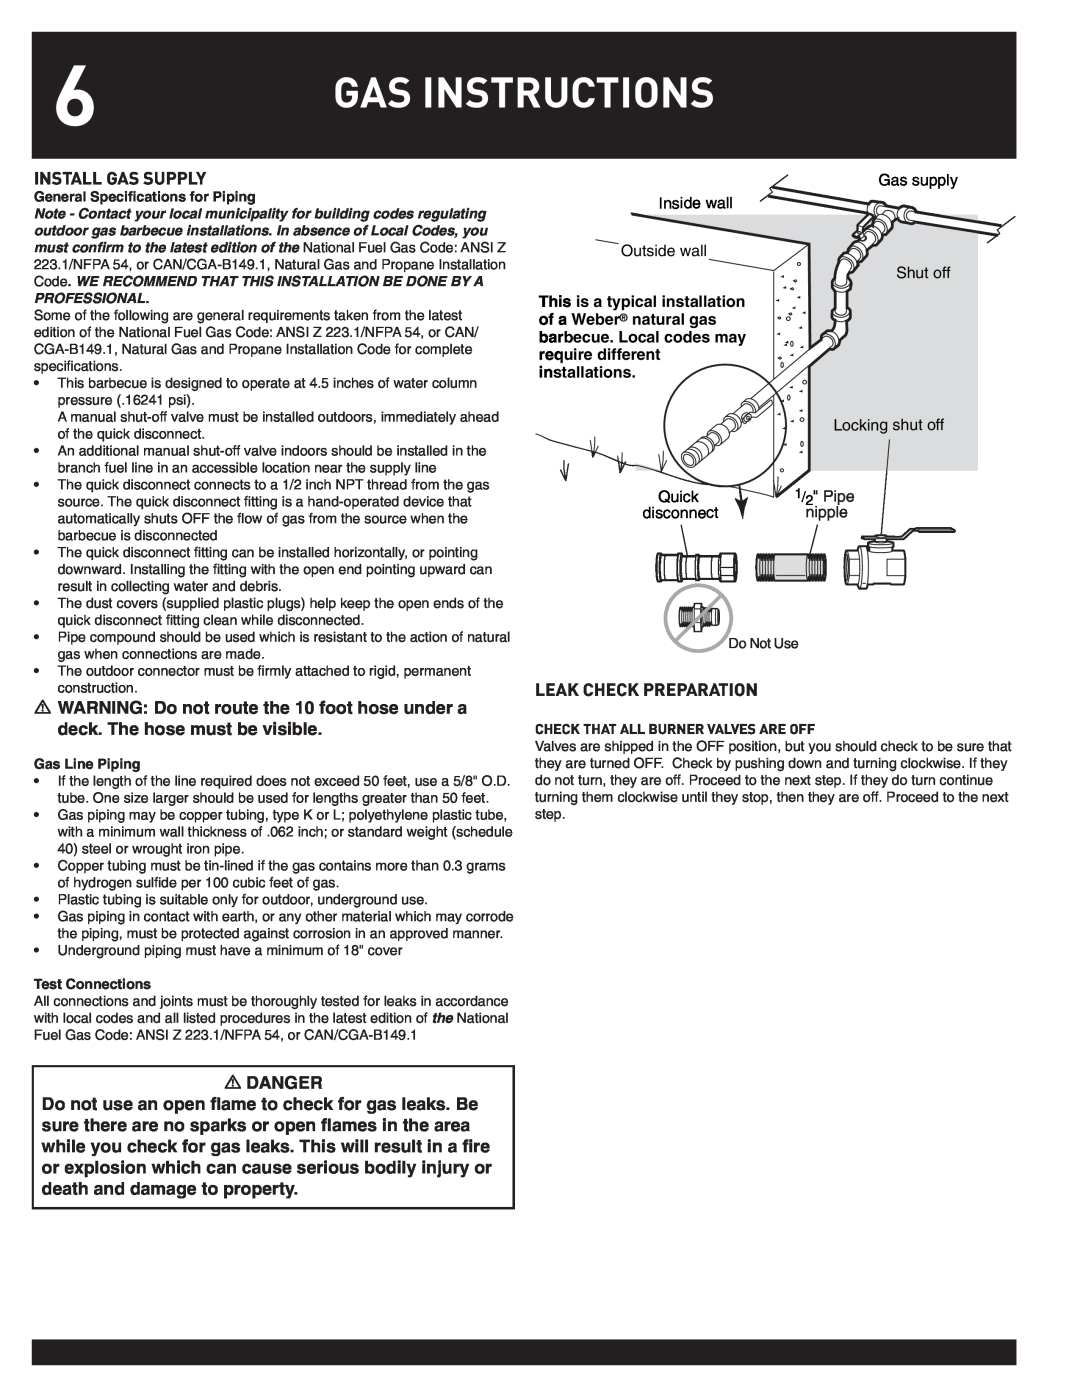 Weber SUMMIT manual Gas Instructions 